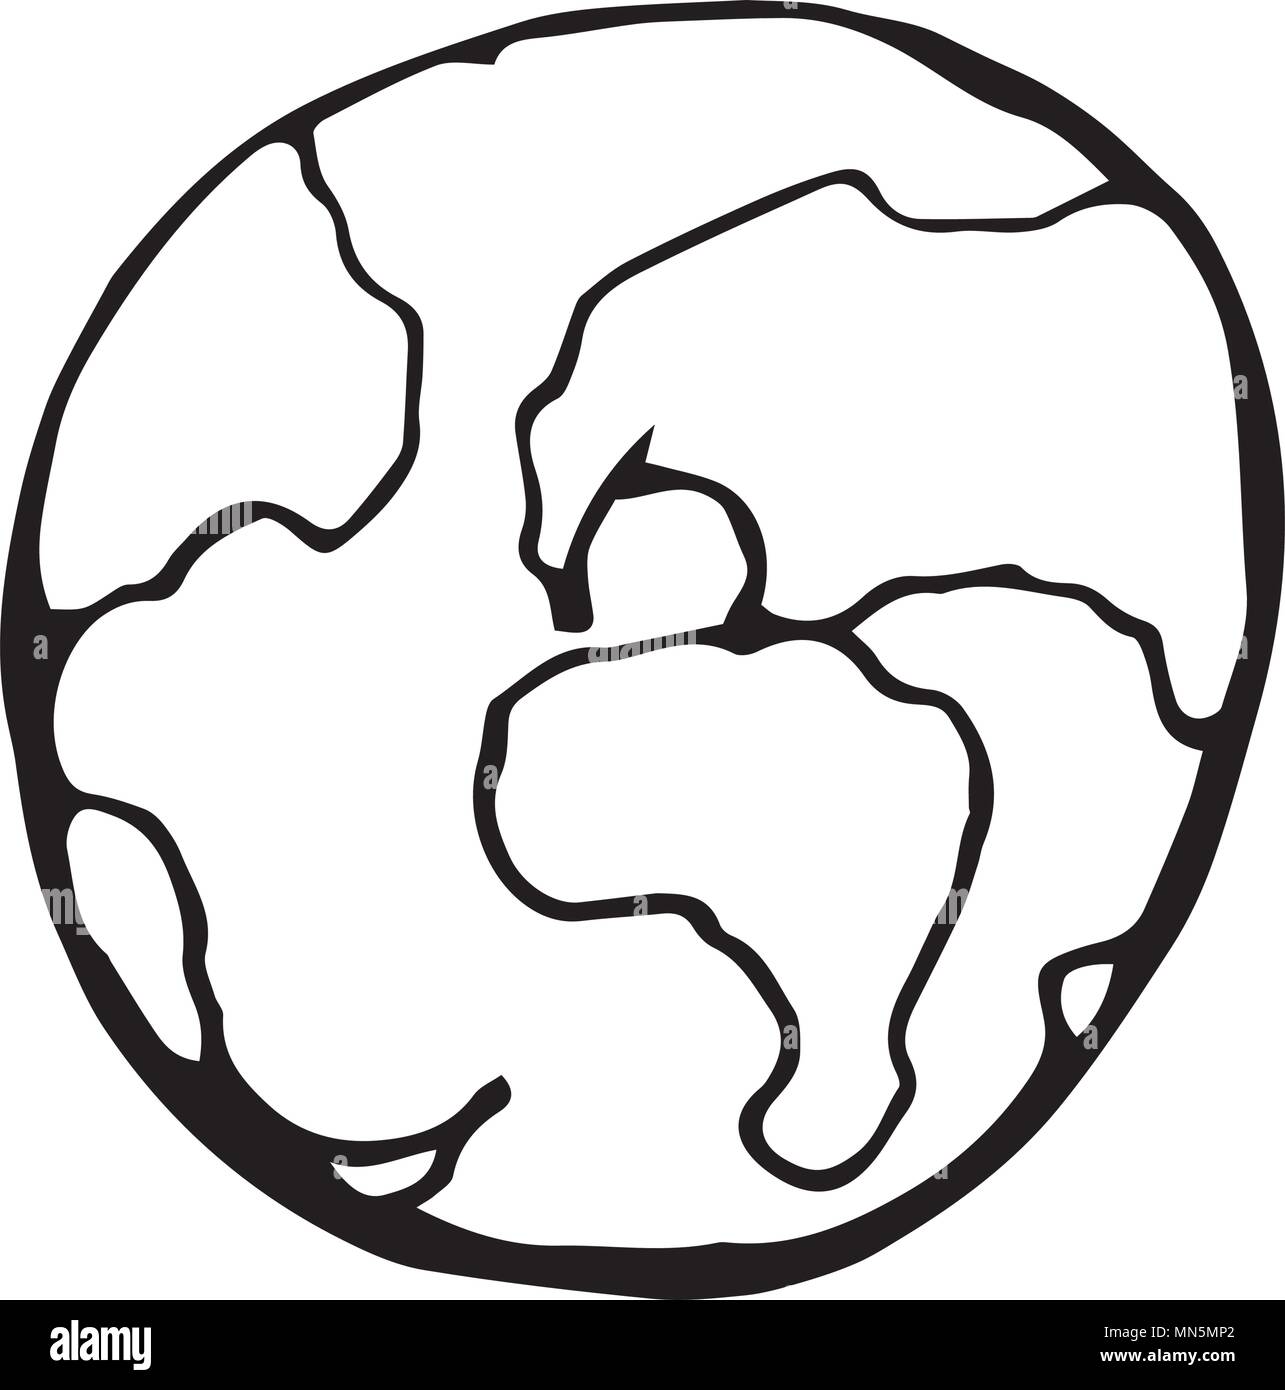 Black and white Earth sketch in childish style. Vector graphic. Stock Vector